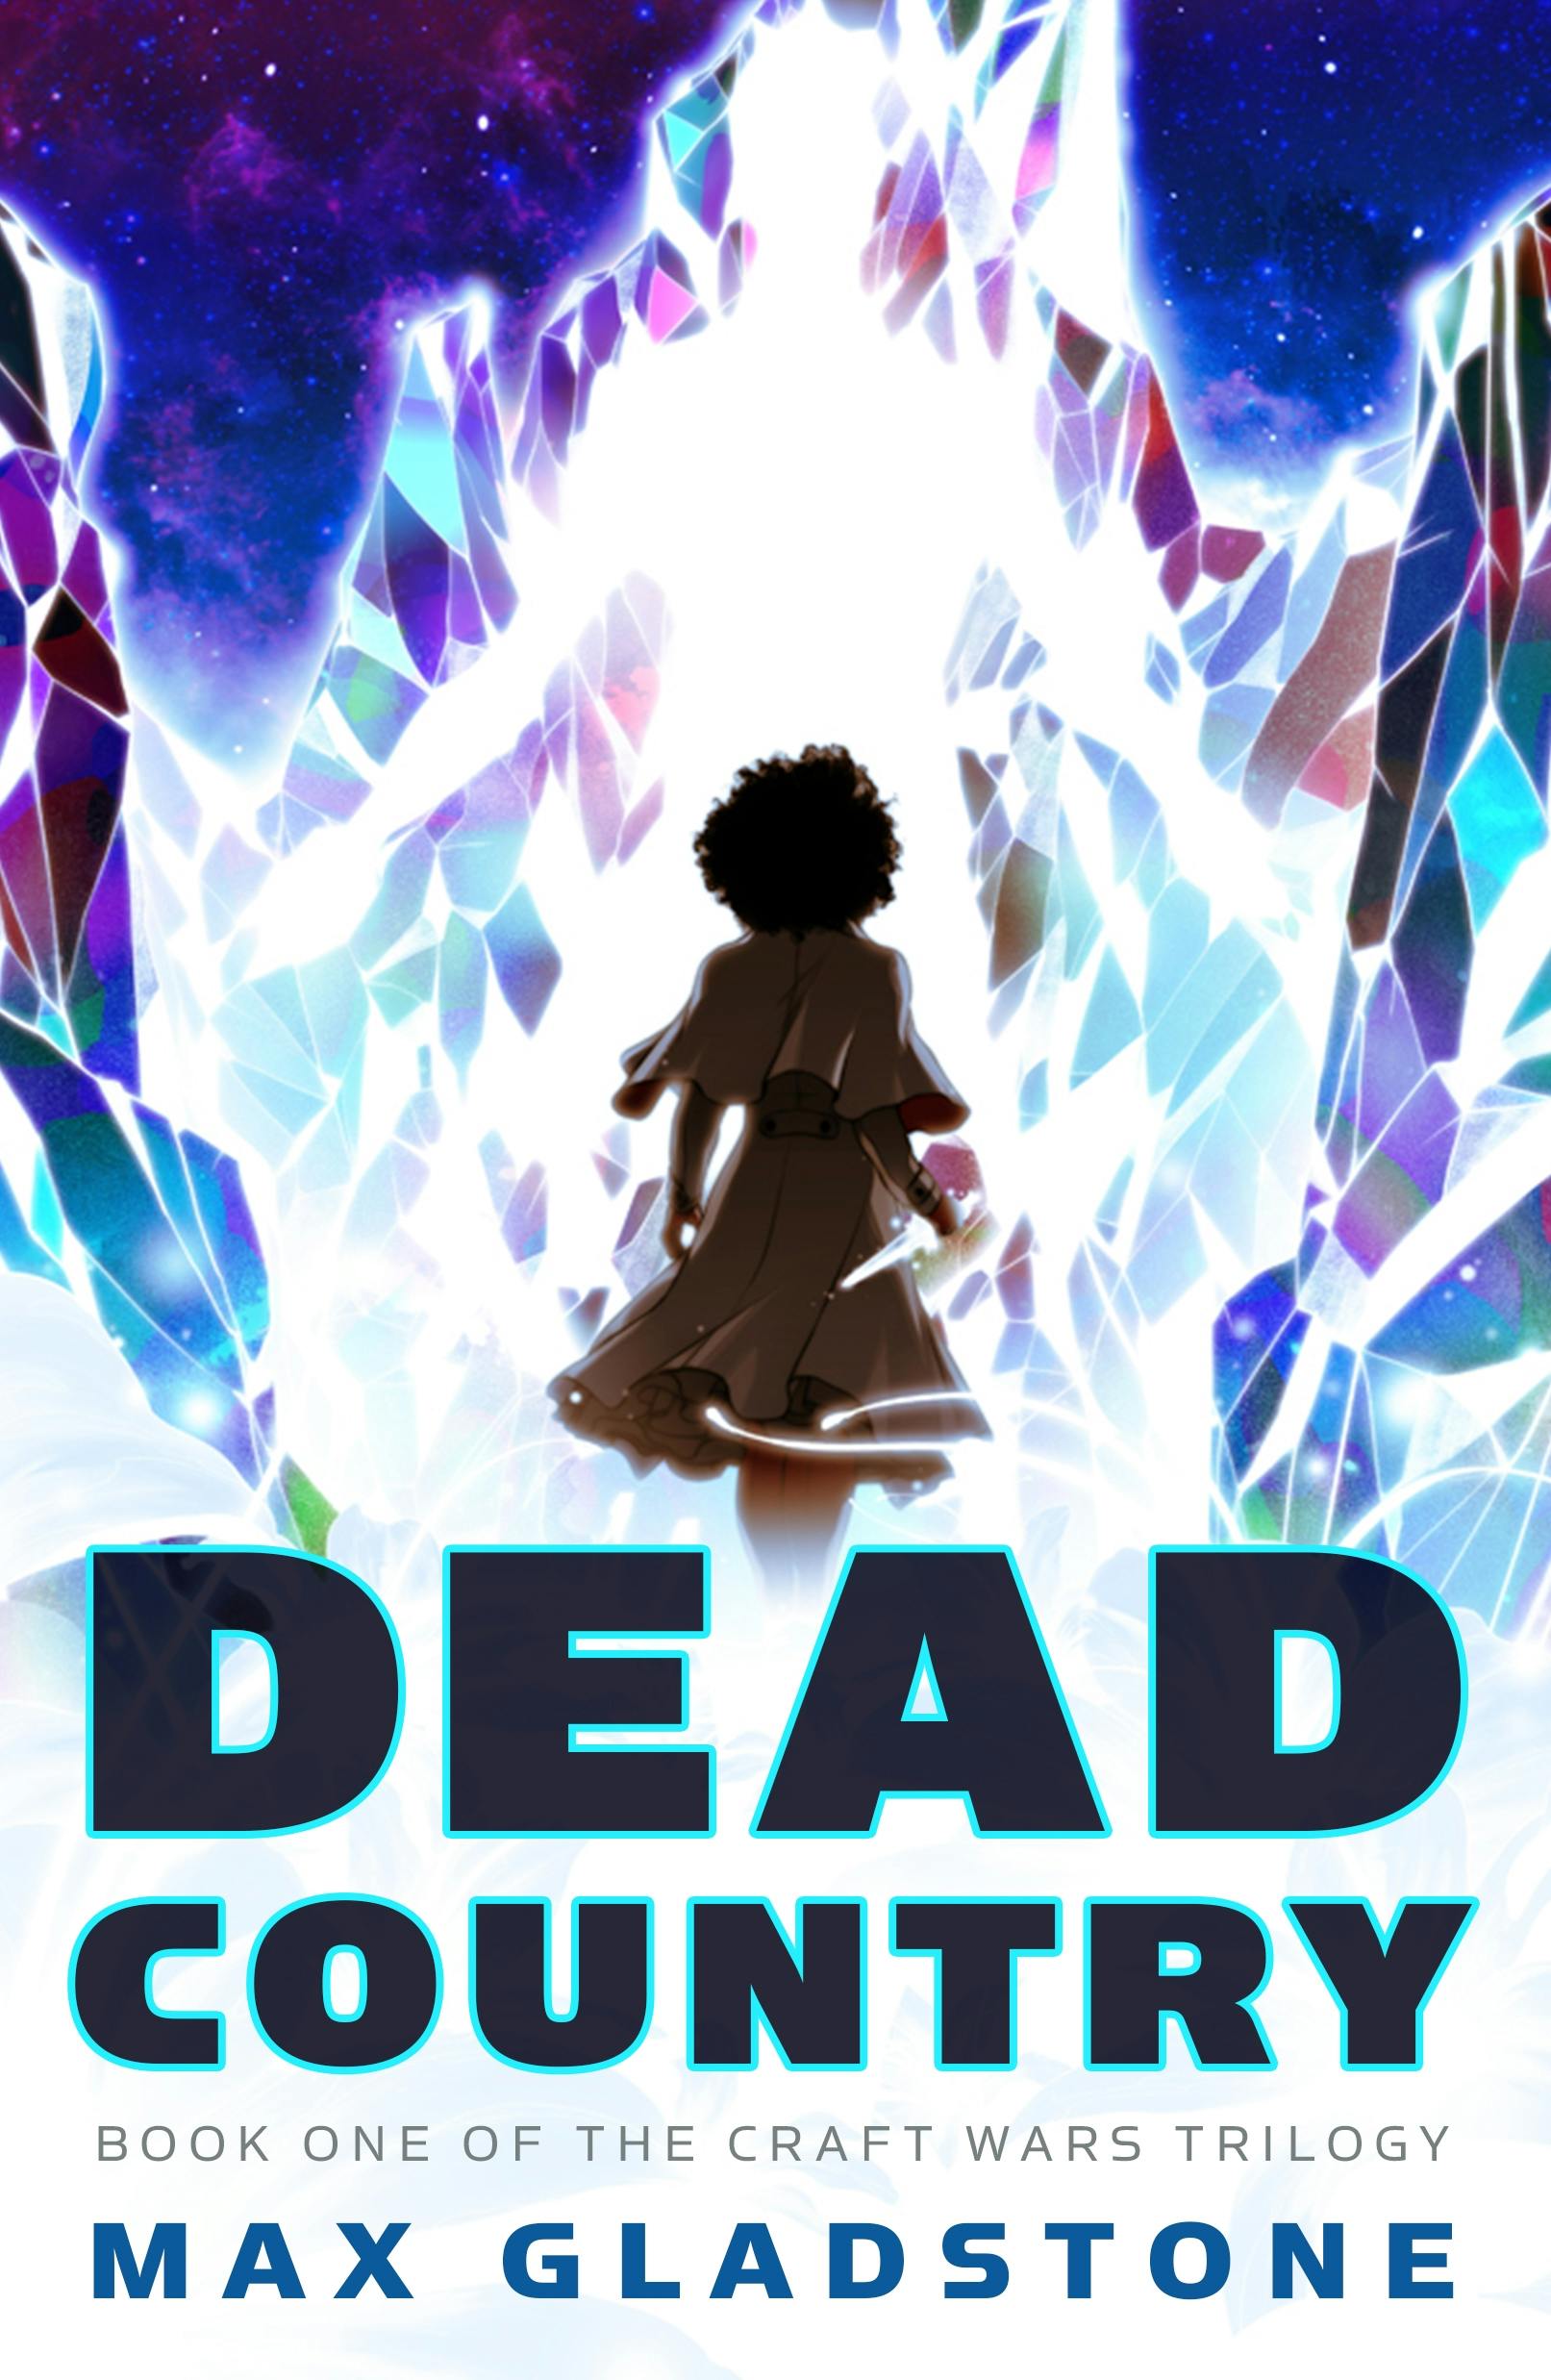 Cover for the book titled as: Dead Country